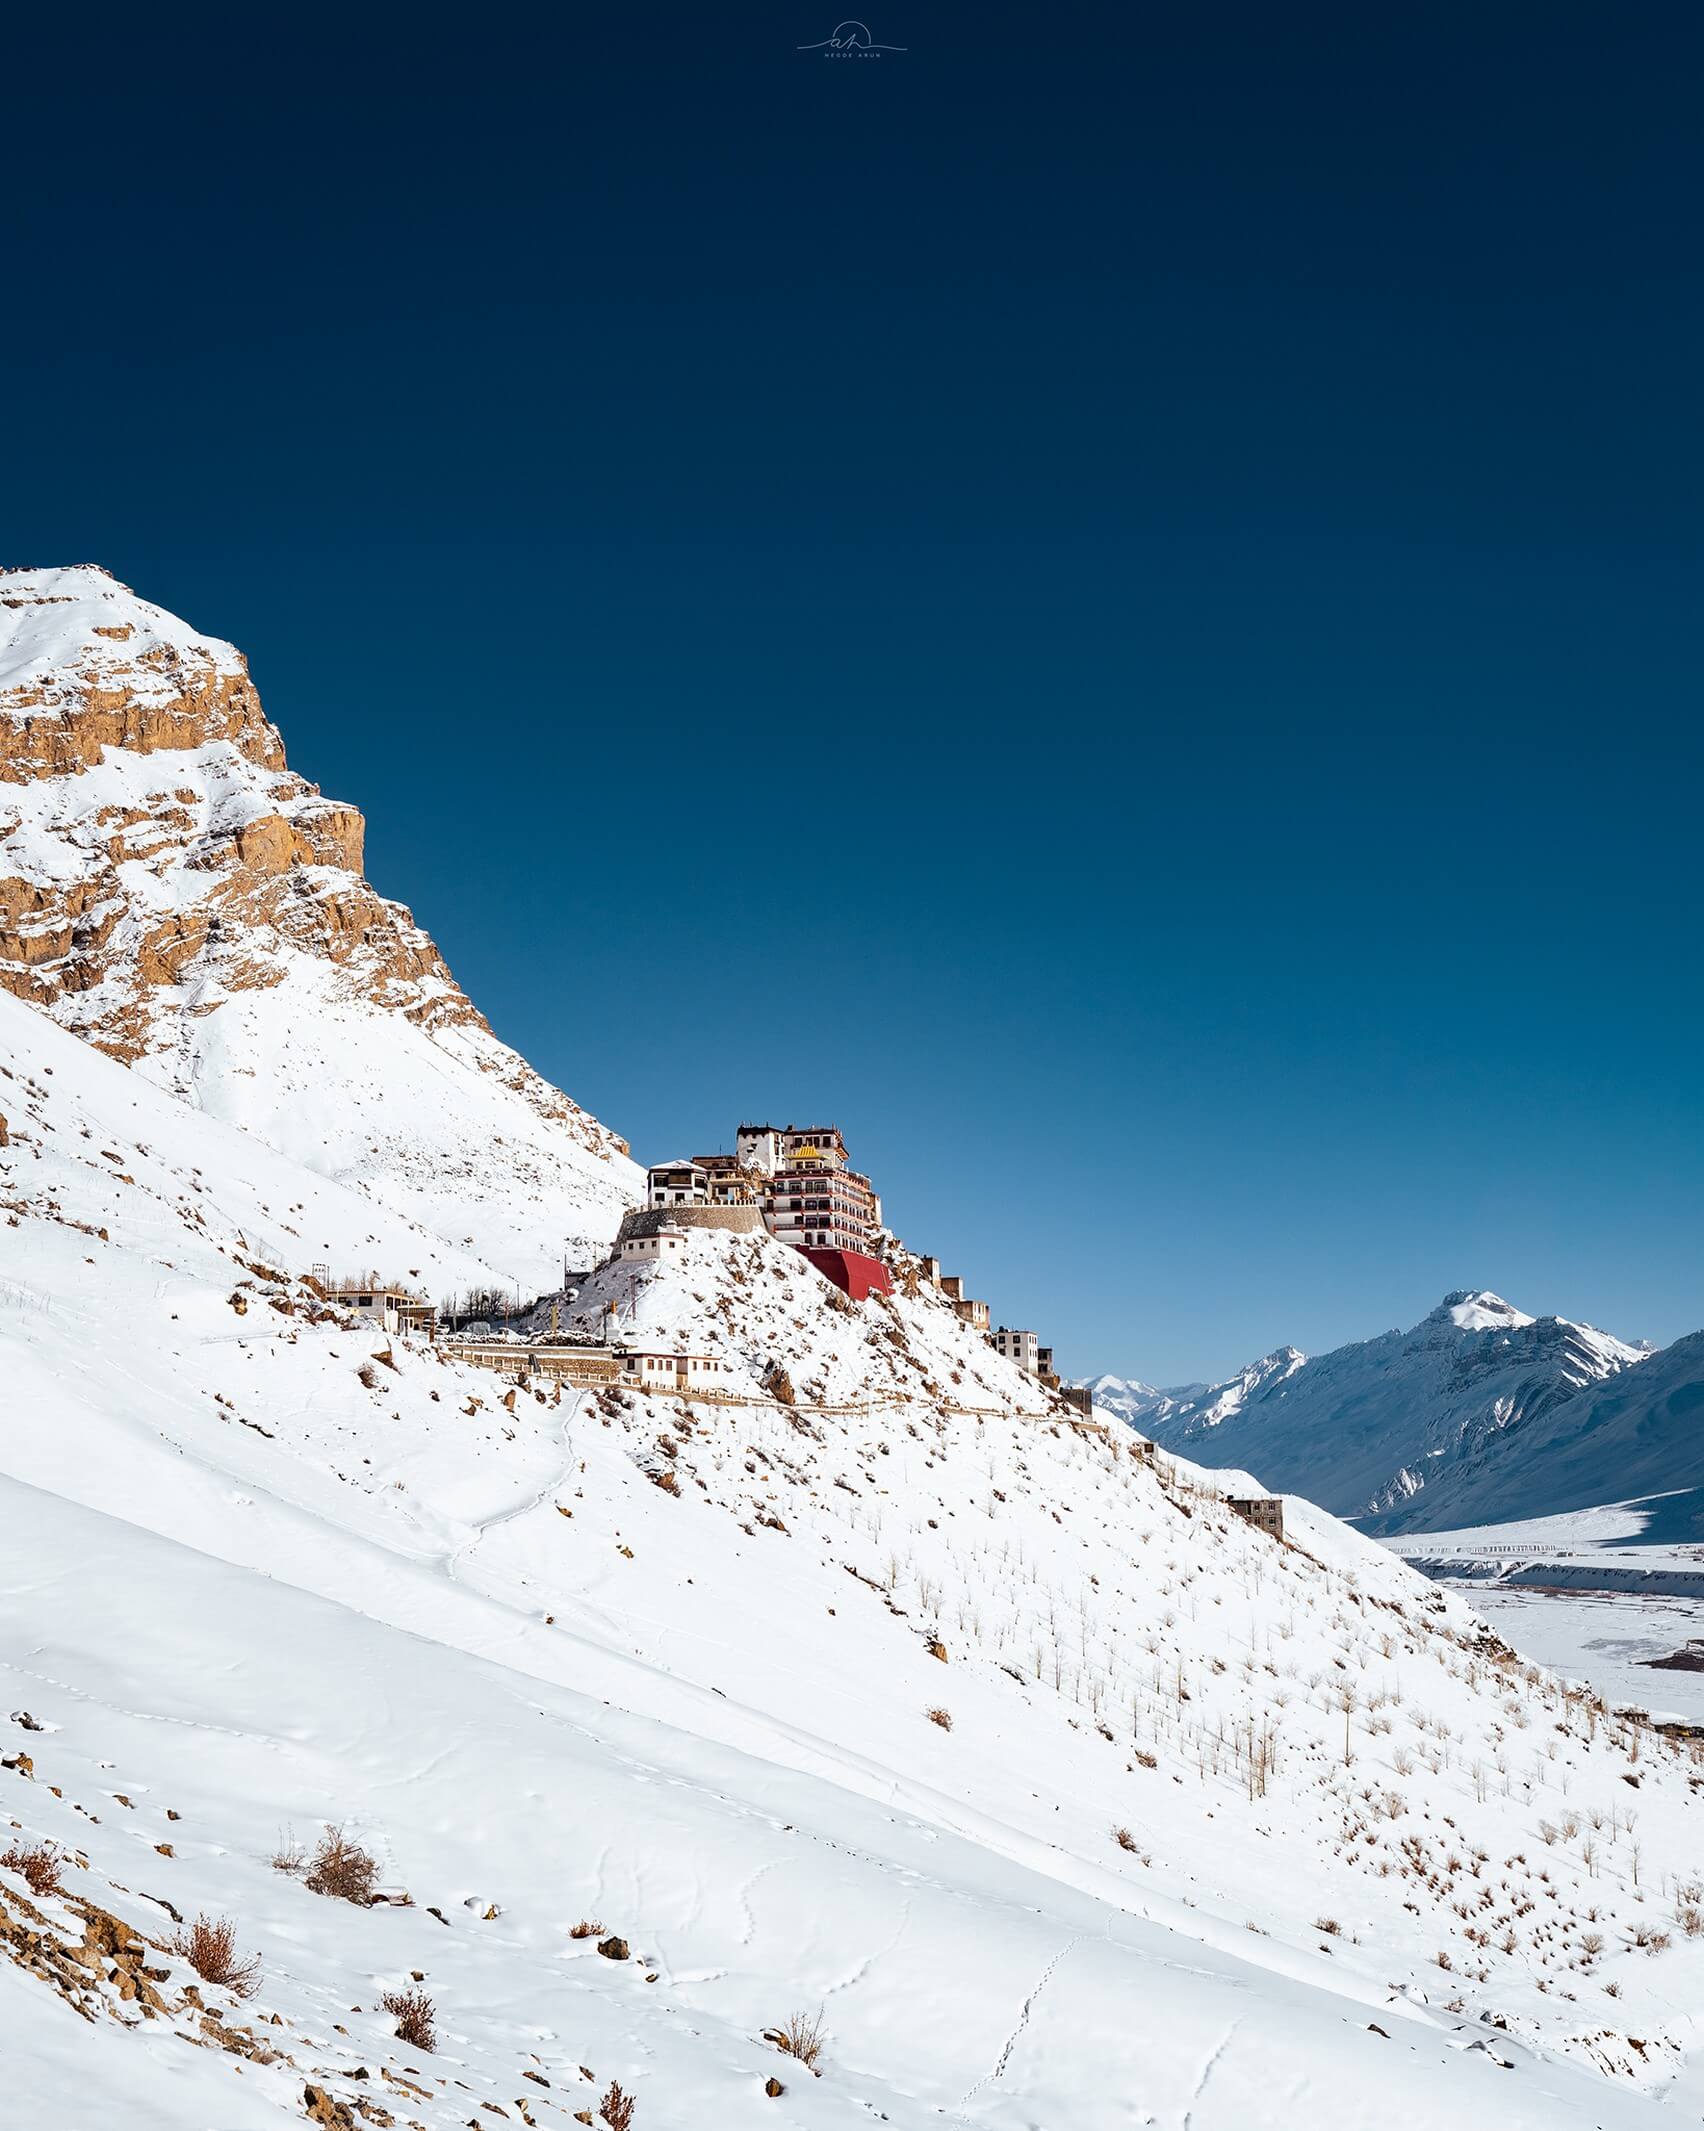 Snow Covered Key Monastery in Winter Spiti Spiti New Year Expedition with Arun Hegden